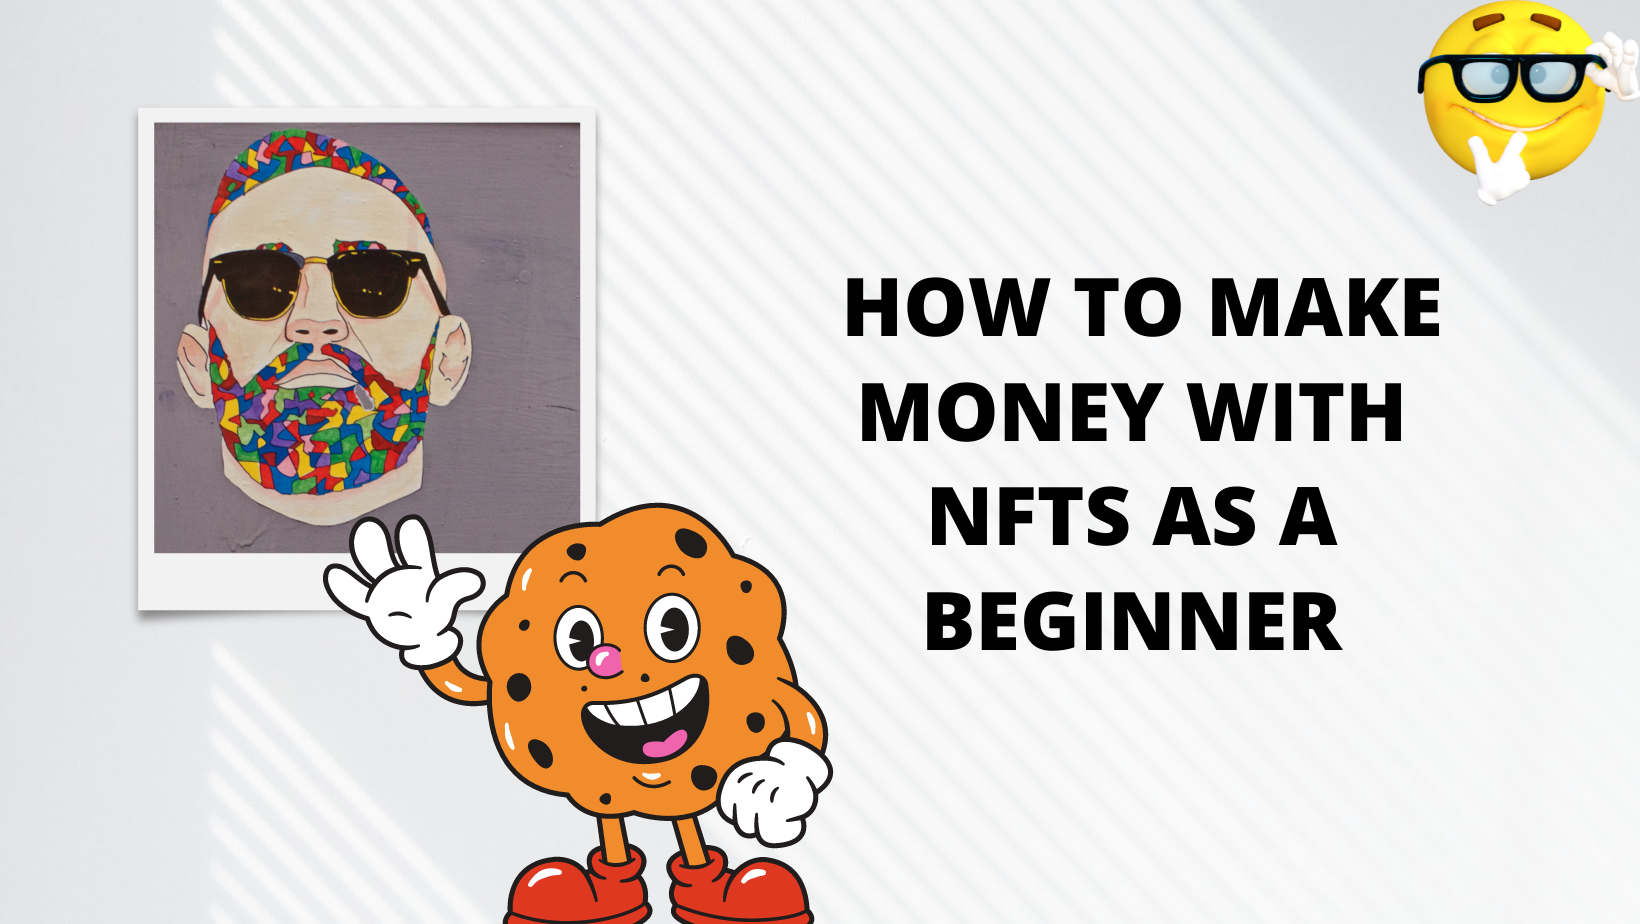 HOW TO MAKE MONEY WITH NFTS AS A BEGINNER